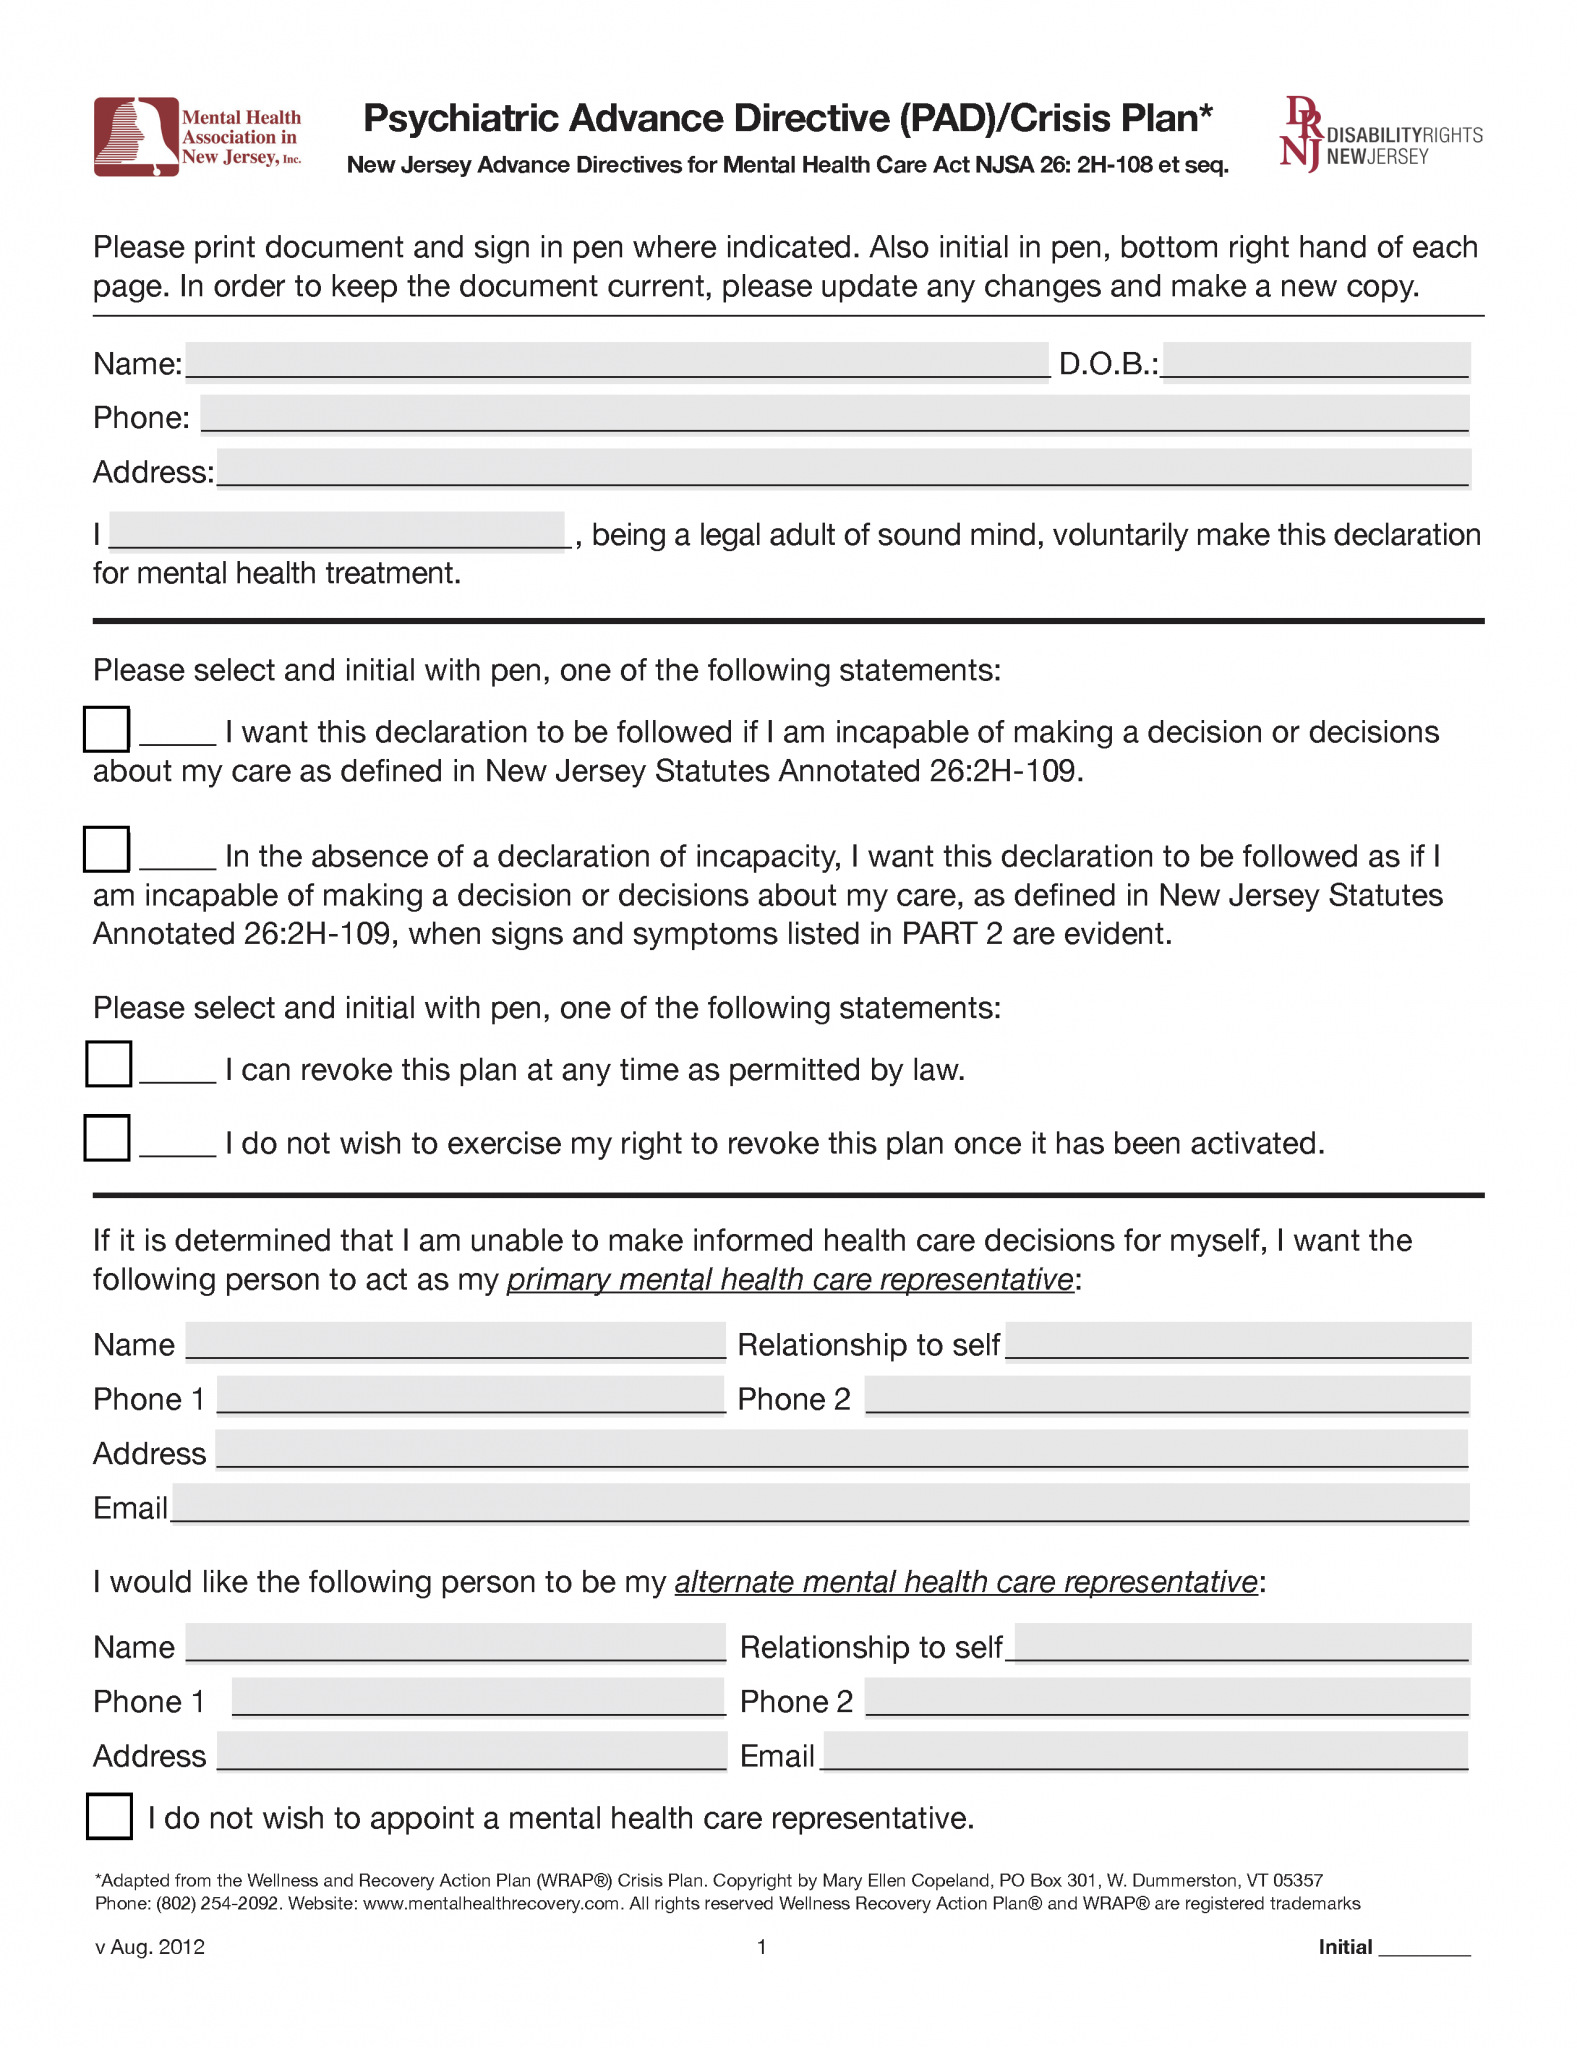 free-new-jersey-advance-directive-form-pdf-eforms